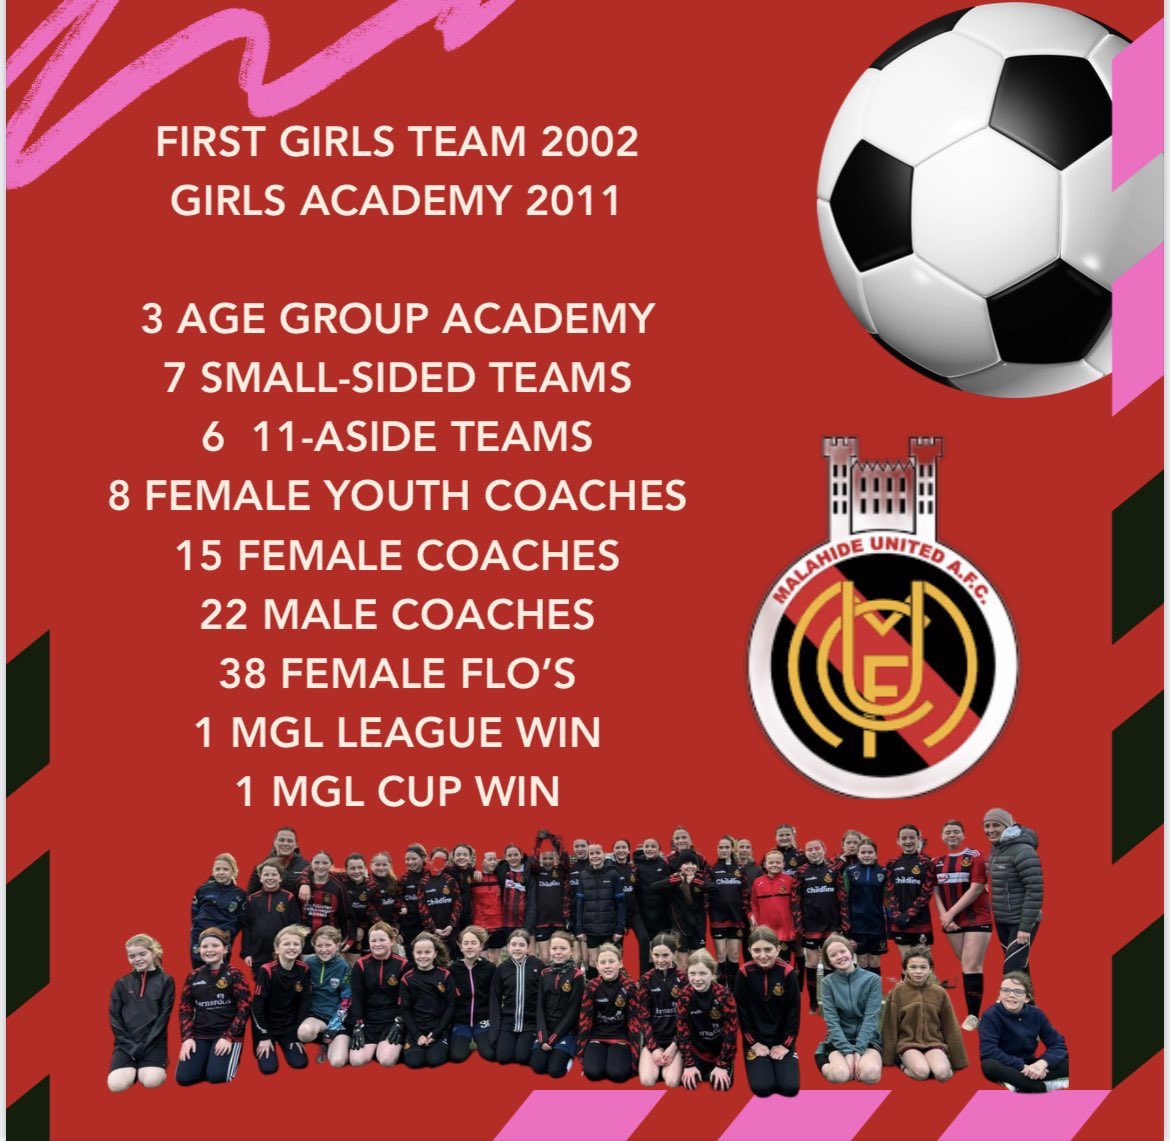 A look back at how far our girls section has come since it’s beginnings not that long ago, The future continues to look bright as the girls section continues to grow within the club, and girls football too in Ireland 🇮🇪 @FingalSports @sportireland @sharonboyle31 @FAIFingal